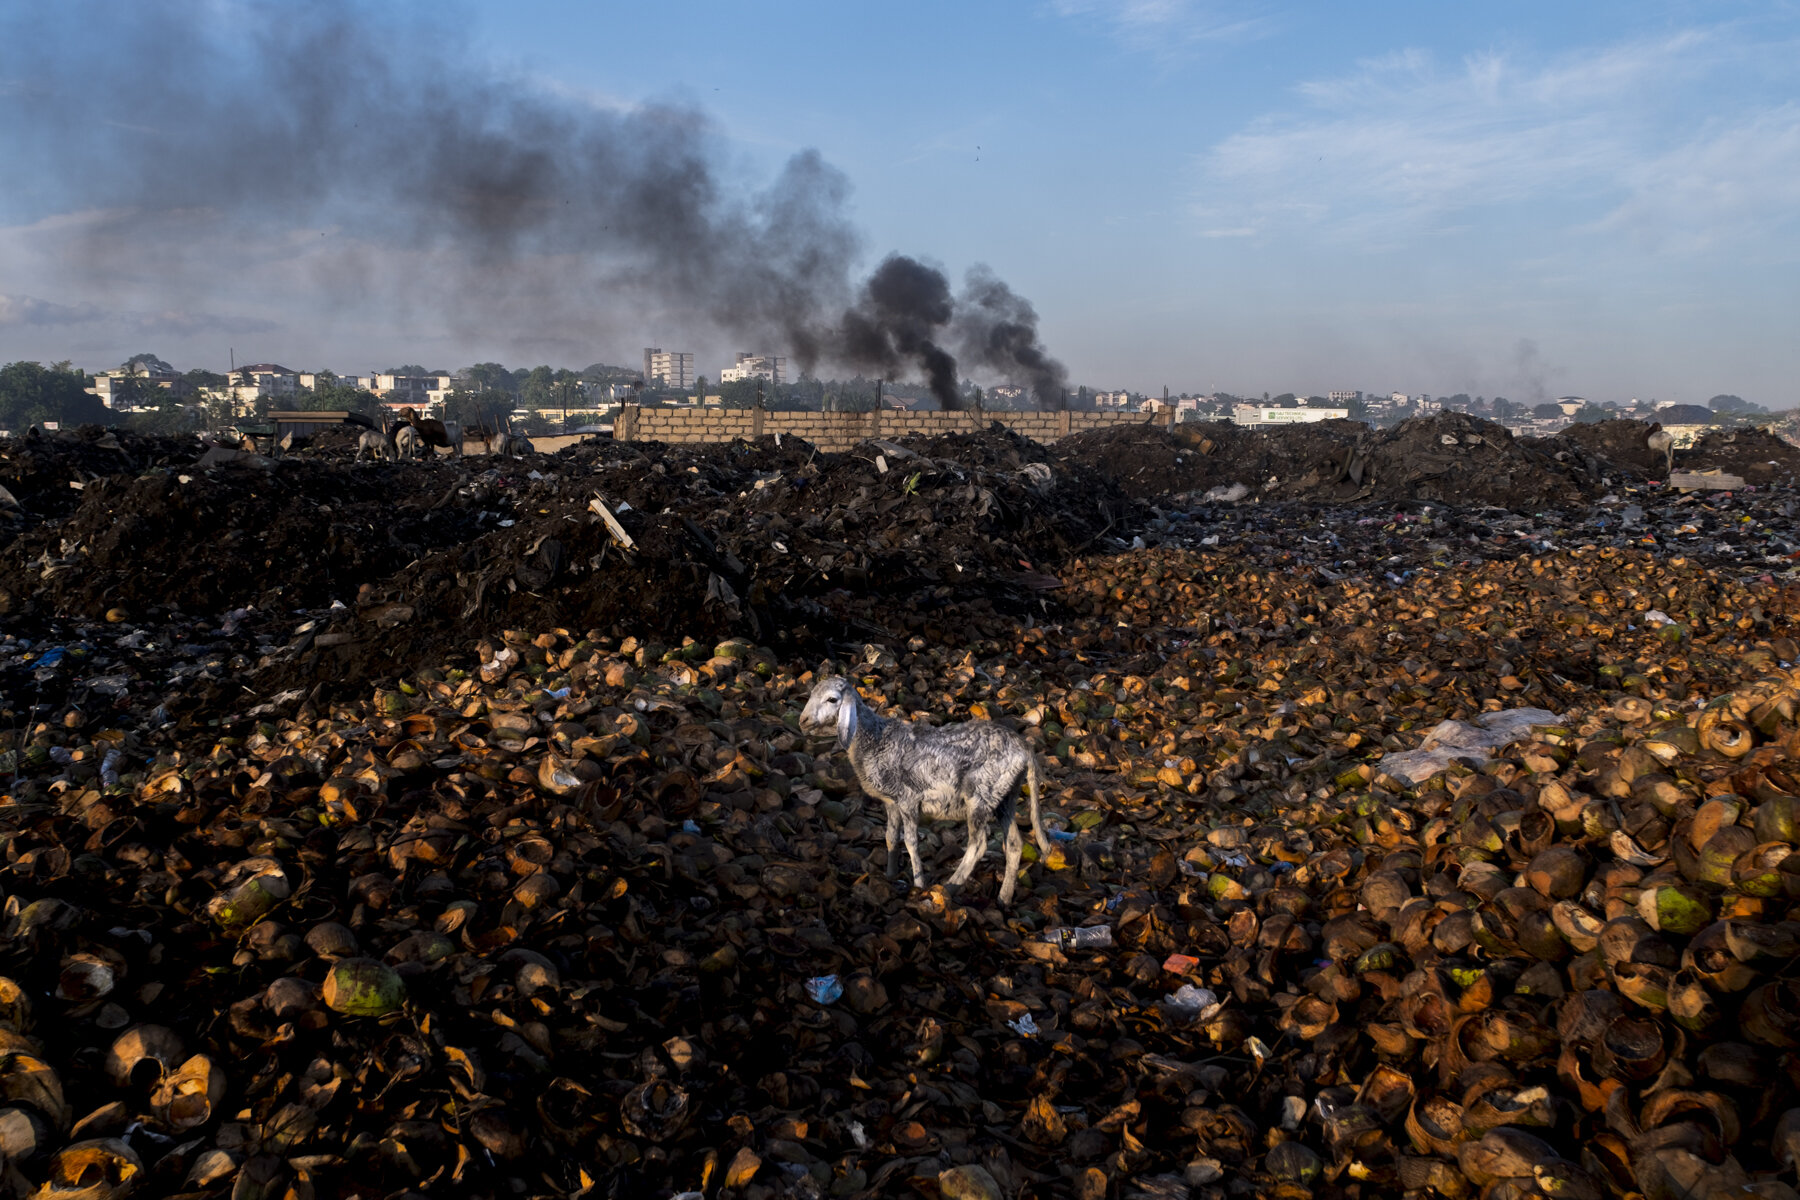  Ghana, Accra, October 2018. A sheep grazes in one of the two burning areas in the scrap yard of Agbogbloshie. Livestock live and graze in different areas of the scrap yard, eating from the highly polluted soil. In the background, the slaughterhouse 